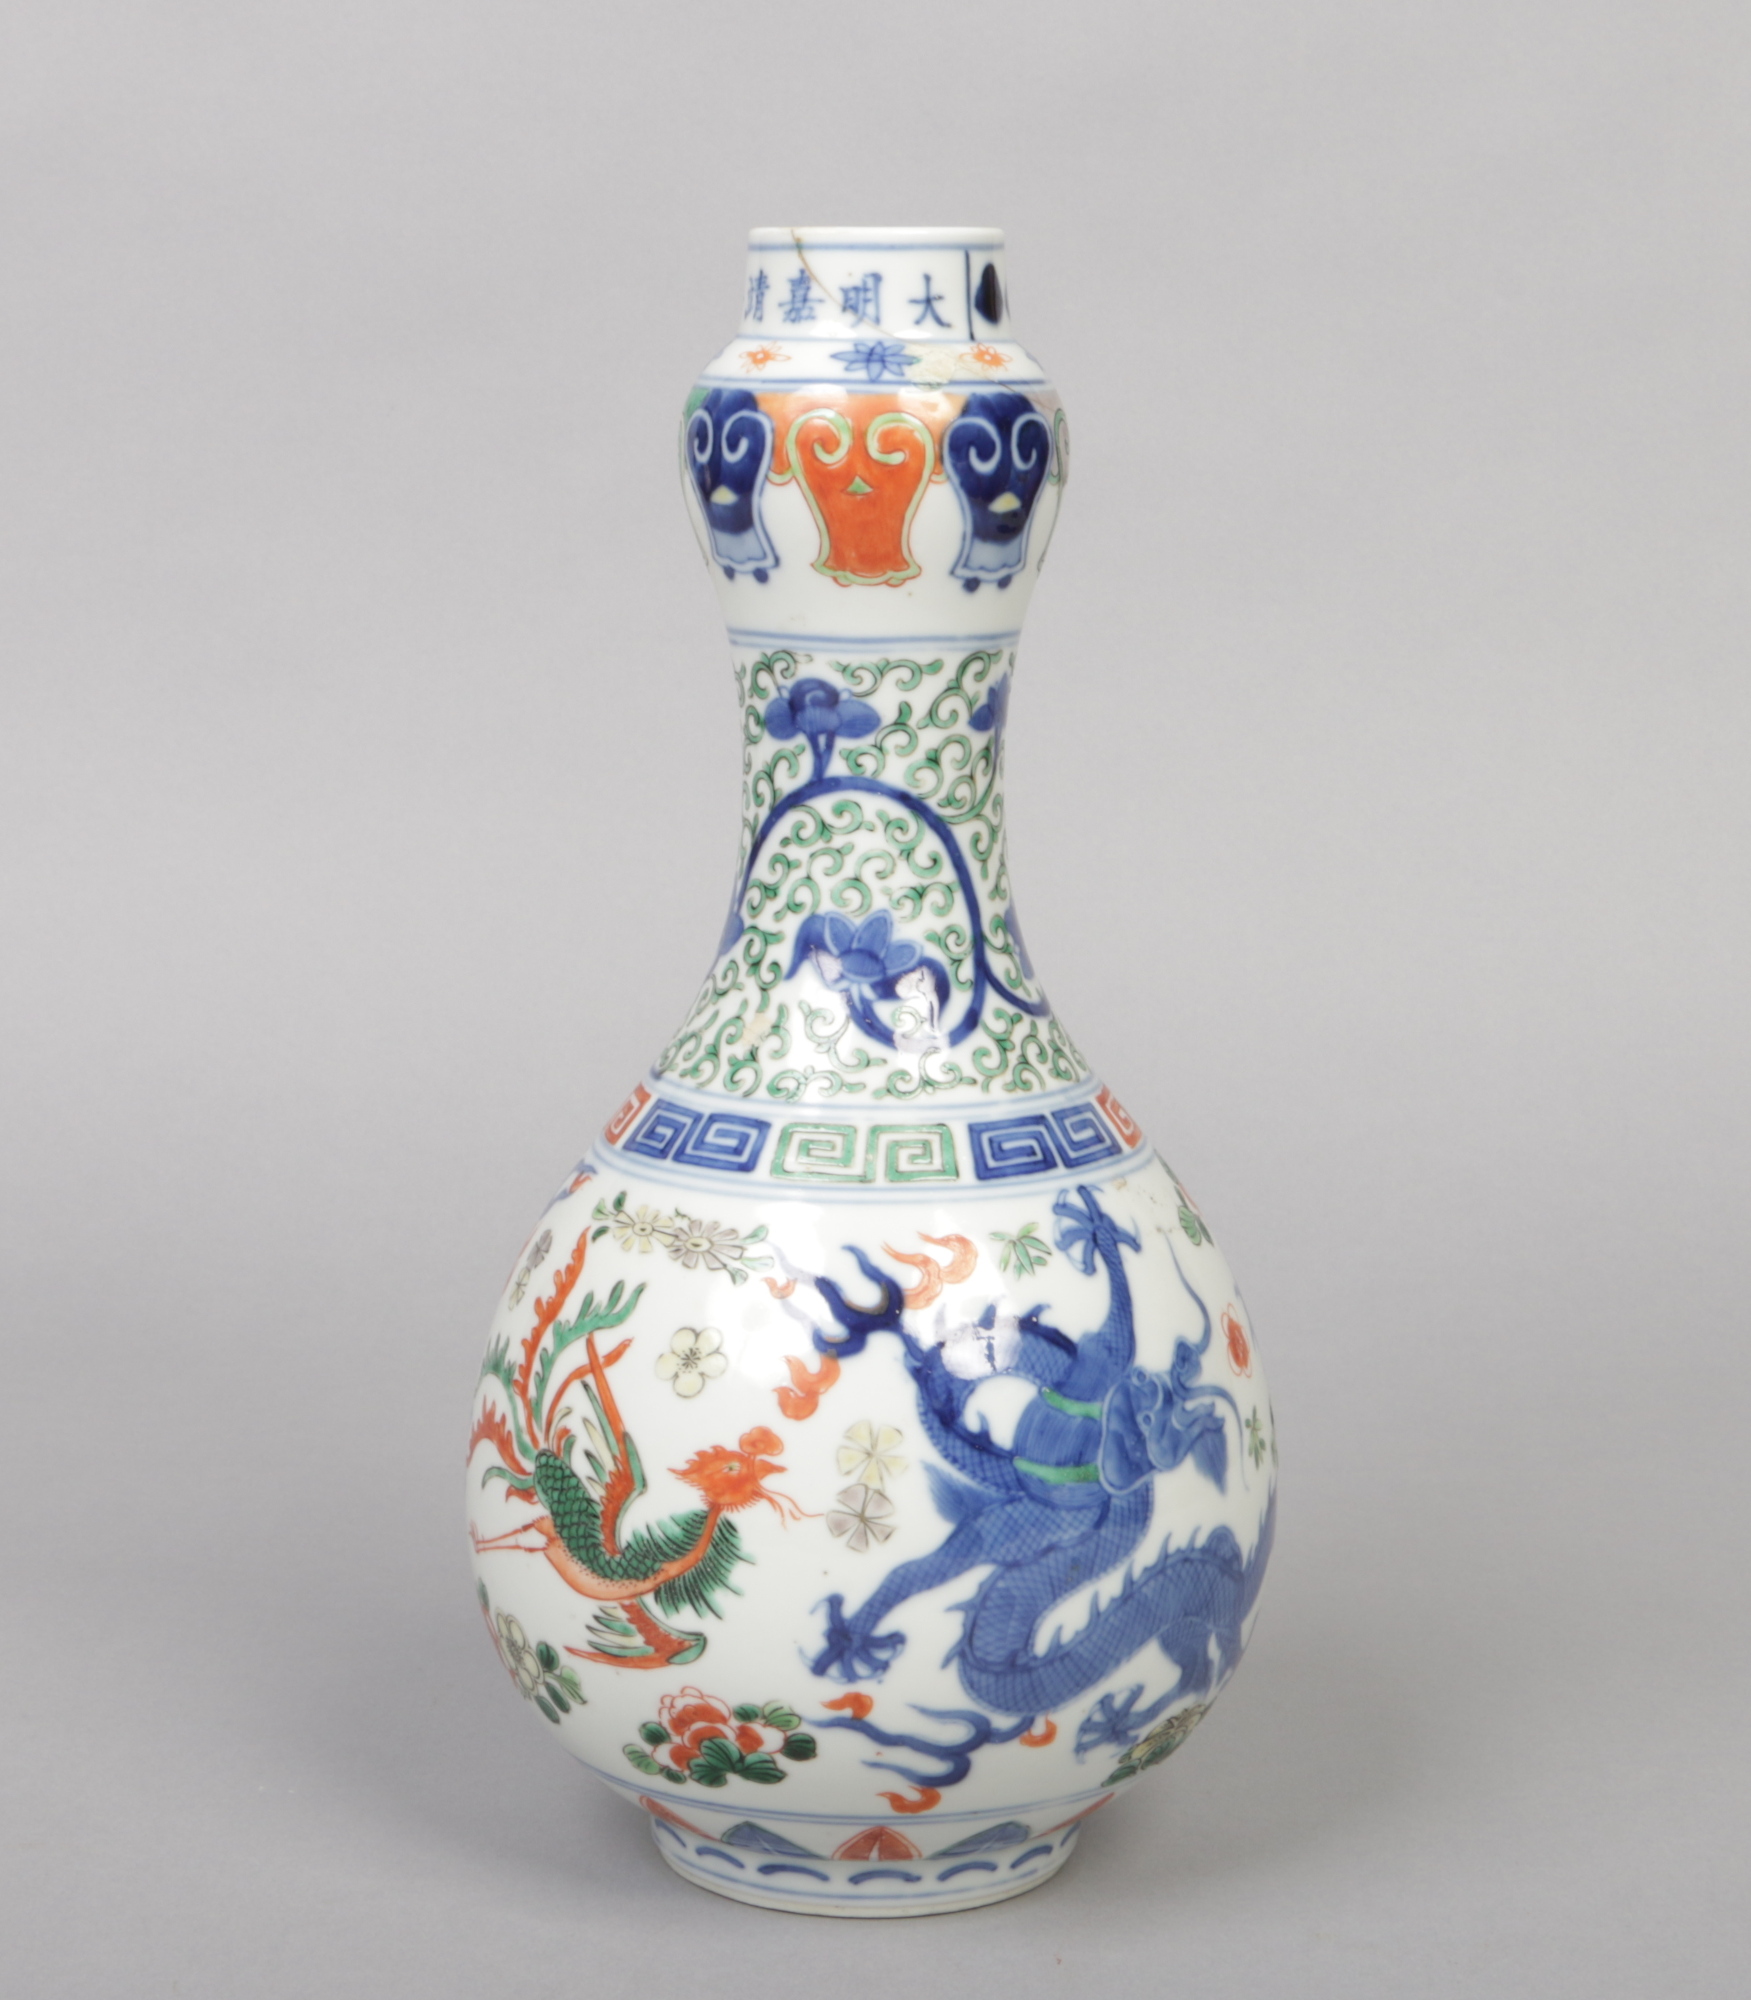 A Chinese Wucai glazed gourd shaped bottle vase. Decorated with a pair of dragons and phoenix